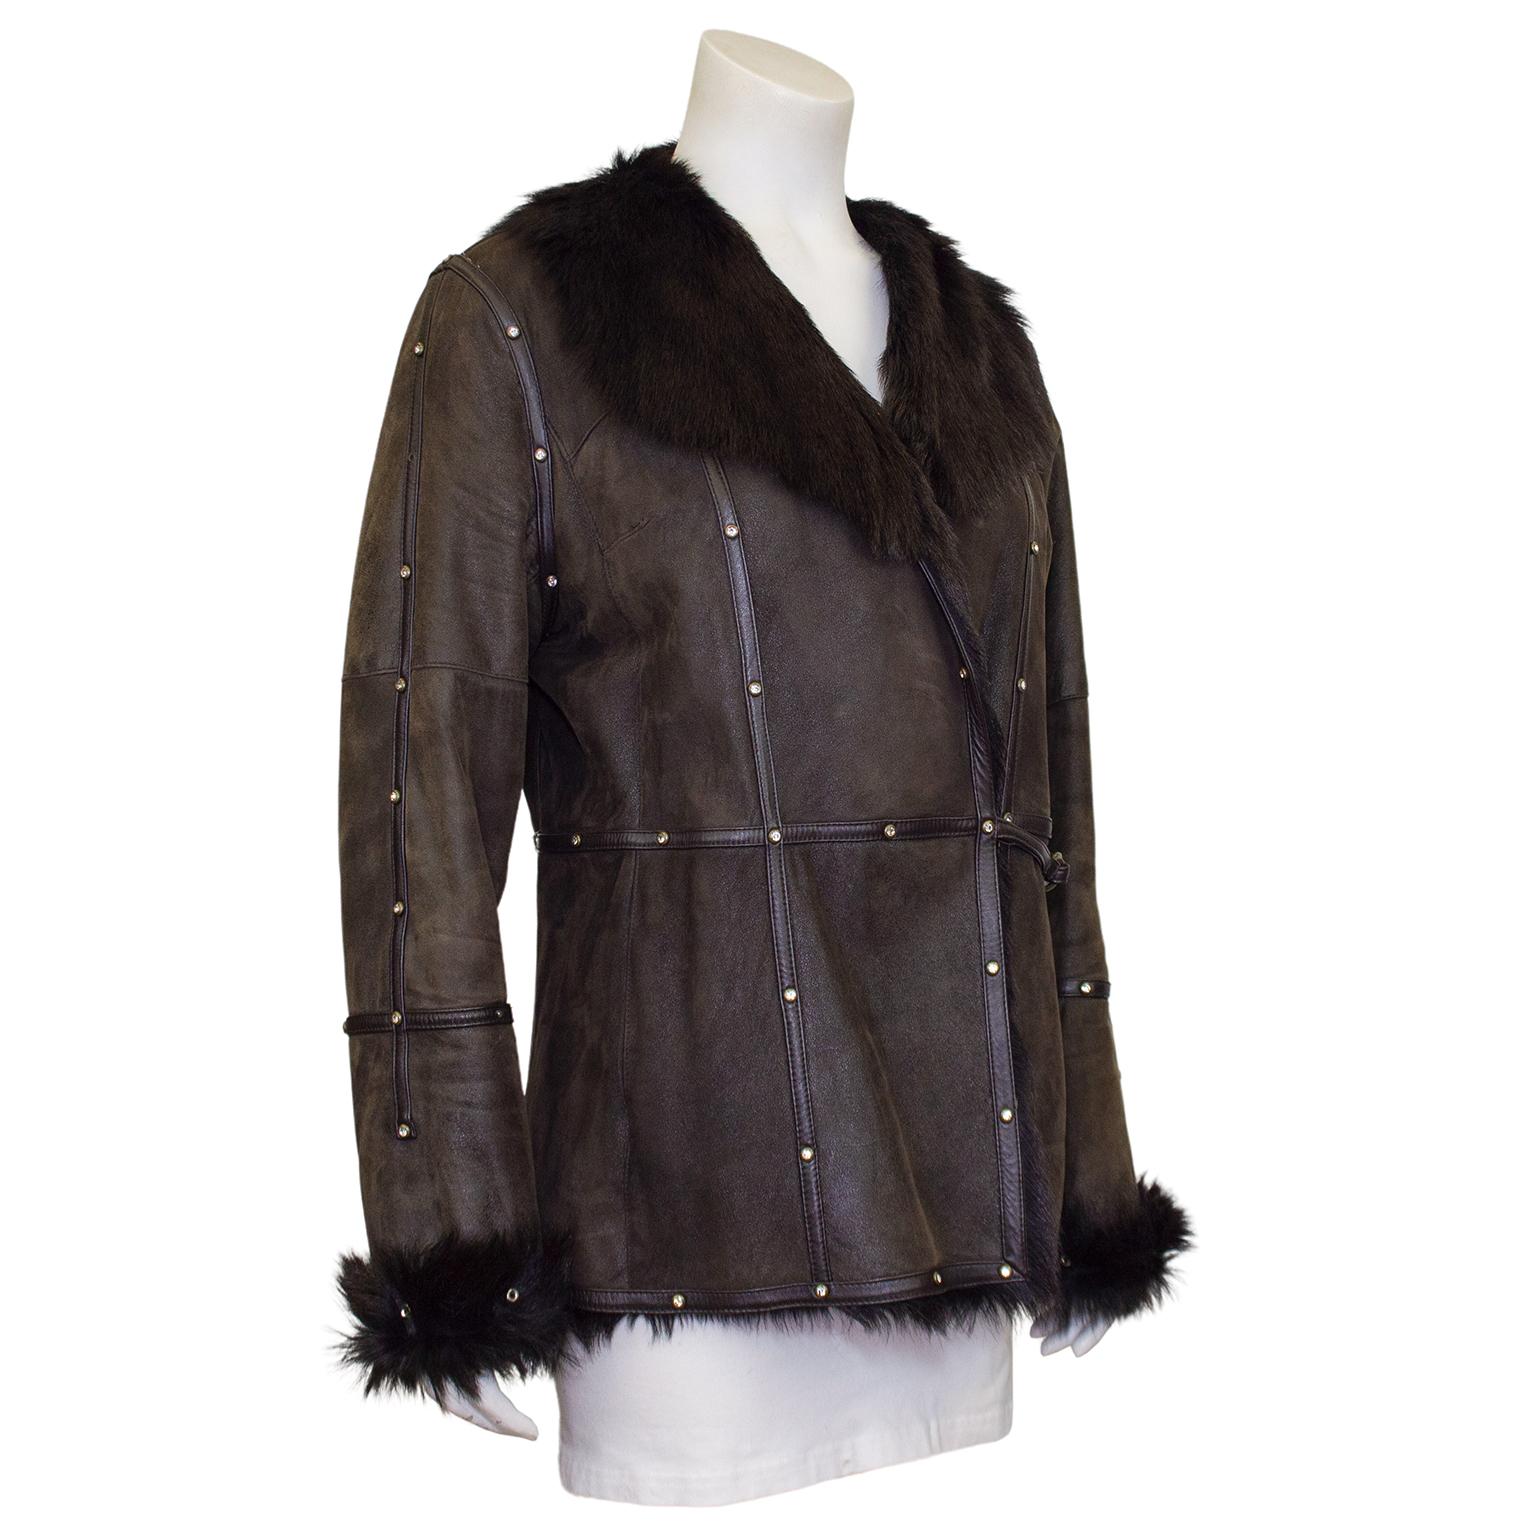 1990s Balmain short brown coat. Dark brown matte leather with dark brown fur collar, cuffs and lining. Polished brown leather trim detail creates a contrast in texture and is embellished with rhinestones in round gold tone metal settings. Small